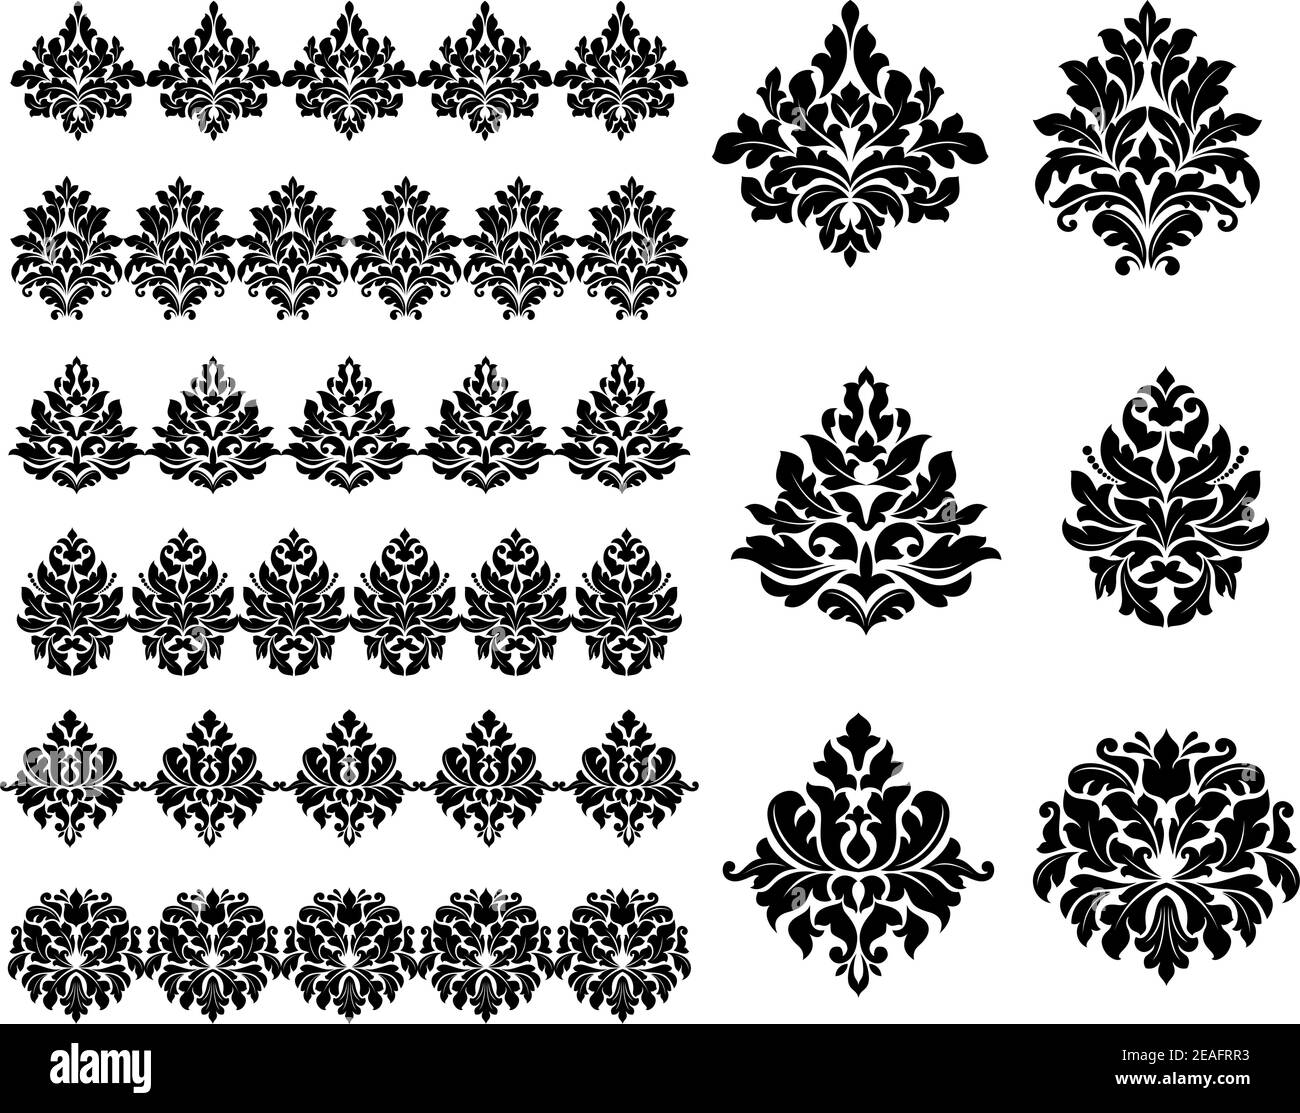 Collection of black silhouetted floral and foliate design elements as arabesques Stock Vector